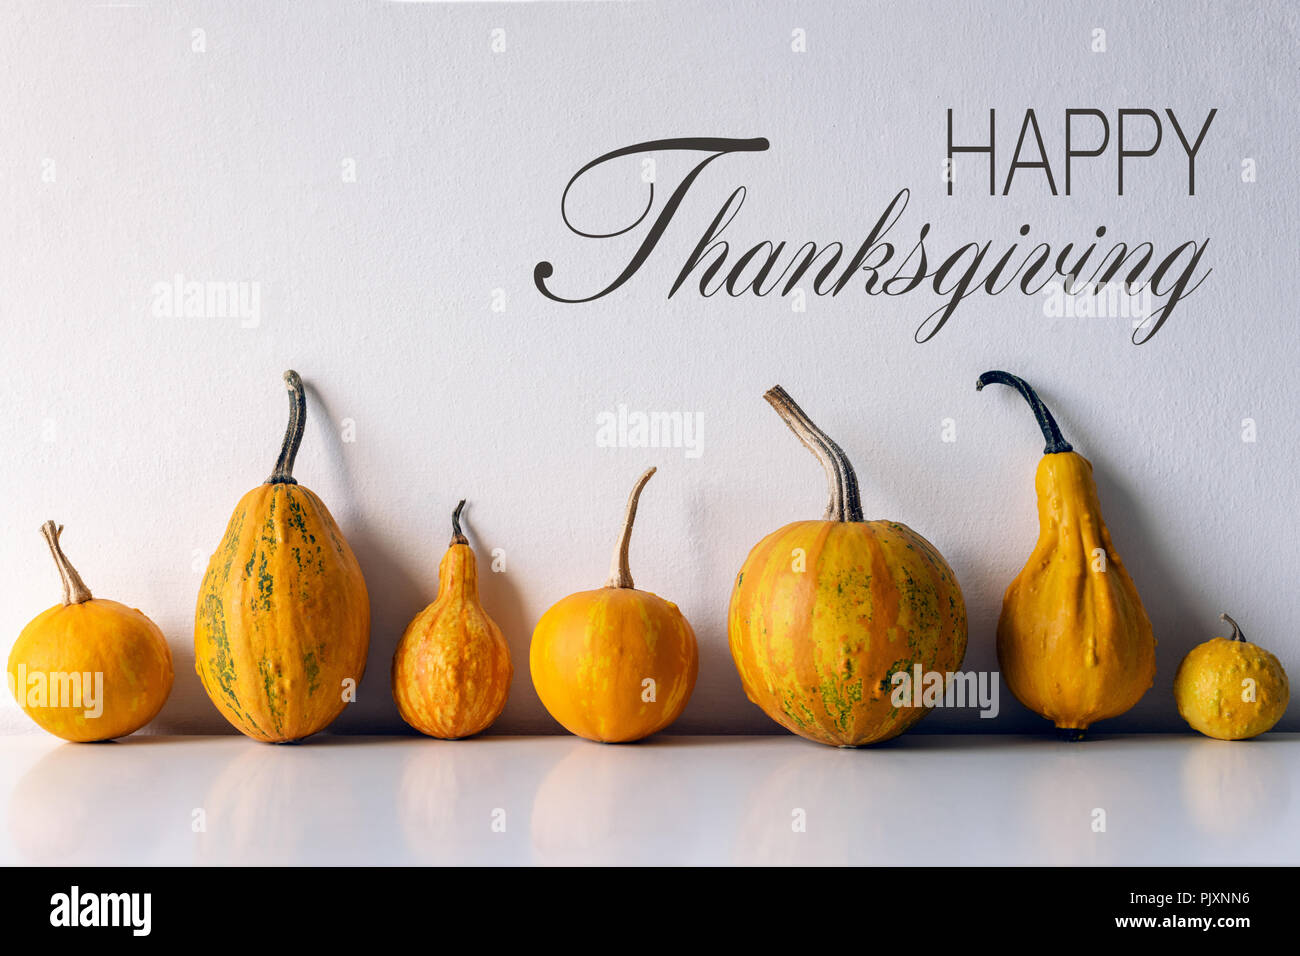 Autumn Harvest and Holiday still life. Happy Thanksgiving Banner. Selection of various pumpkins on dark wooden background. Autumn vegetables and seaso Stock Photo